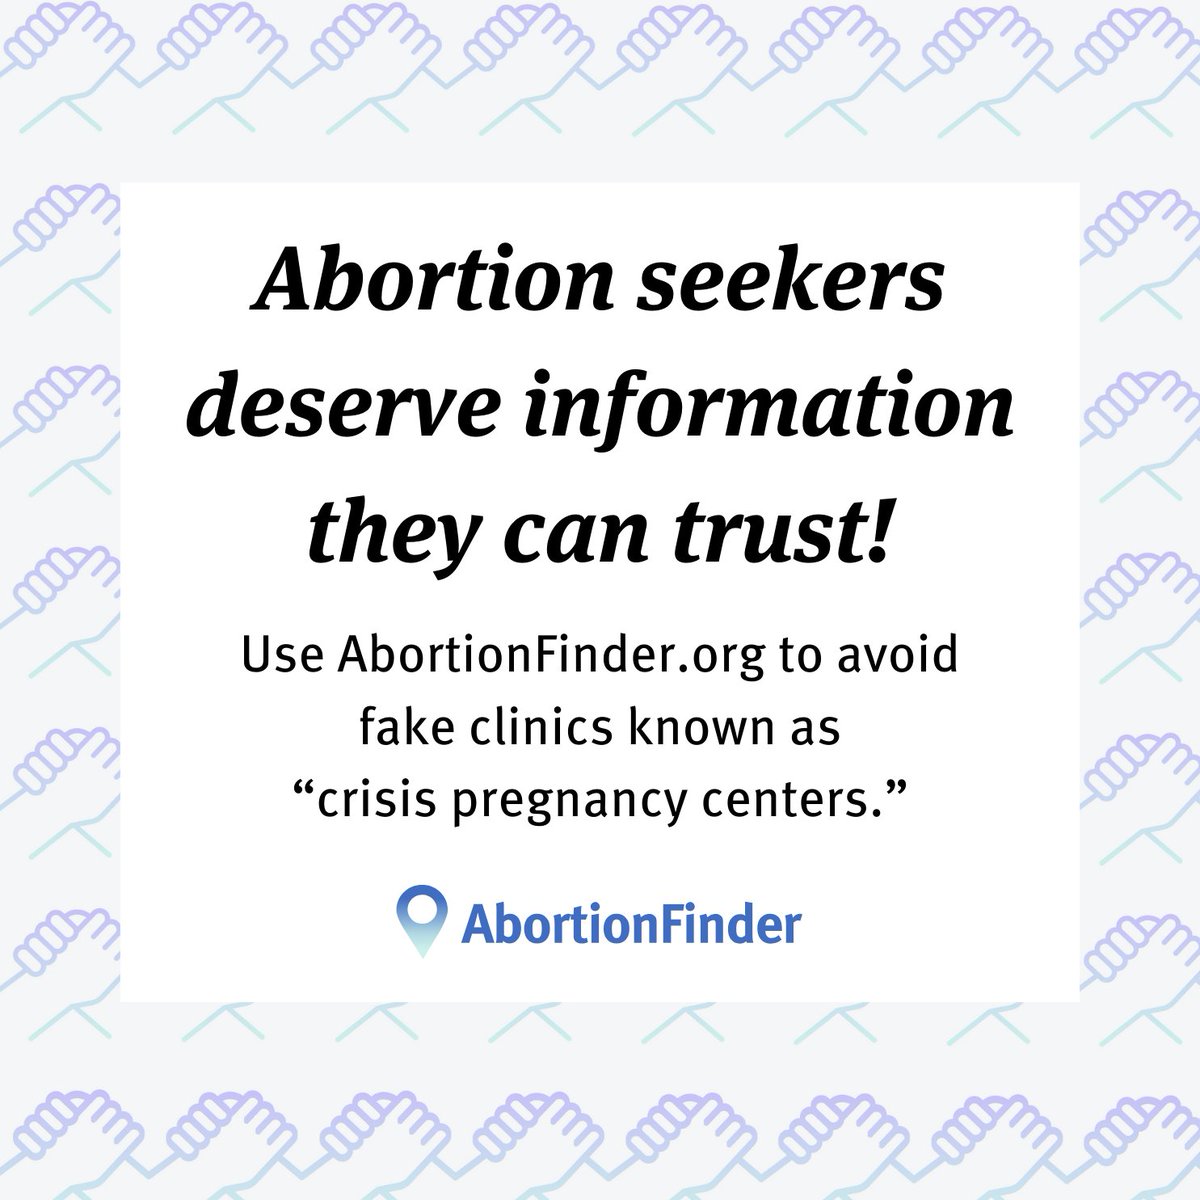 Fake clinics known as “crisis pregnancy centers” can and do advertise on Google as offering pregnancy options, when in fact they do NOT offer abortions. That's why we have real people verify that every single clinic in the @Abortion_Finder database *actually* provides abortions!